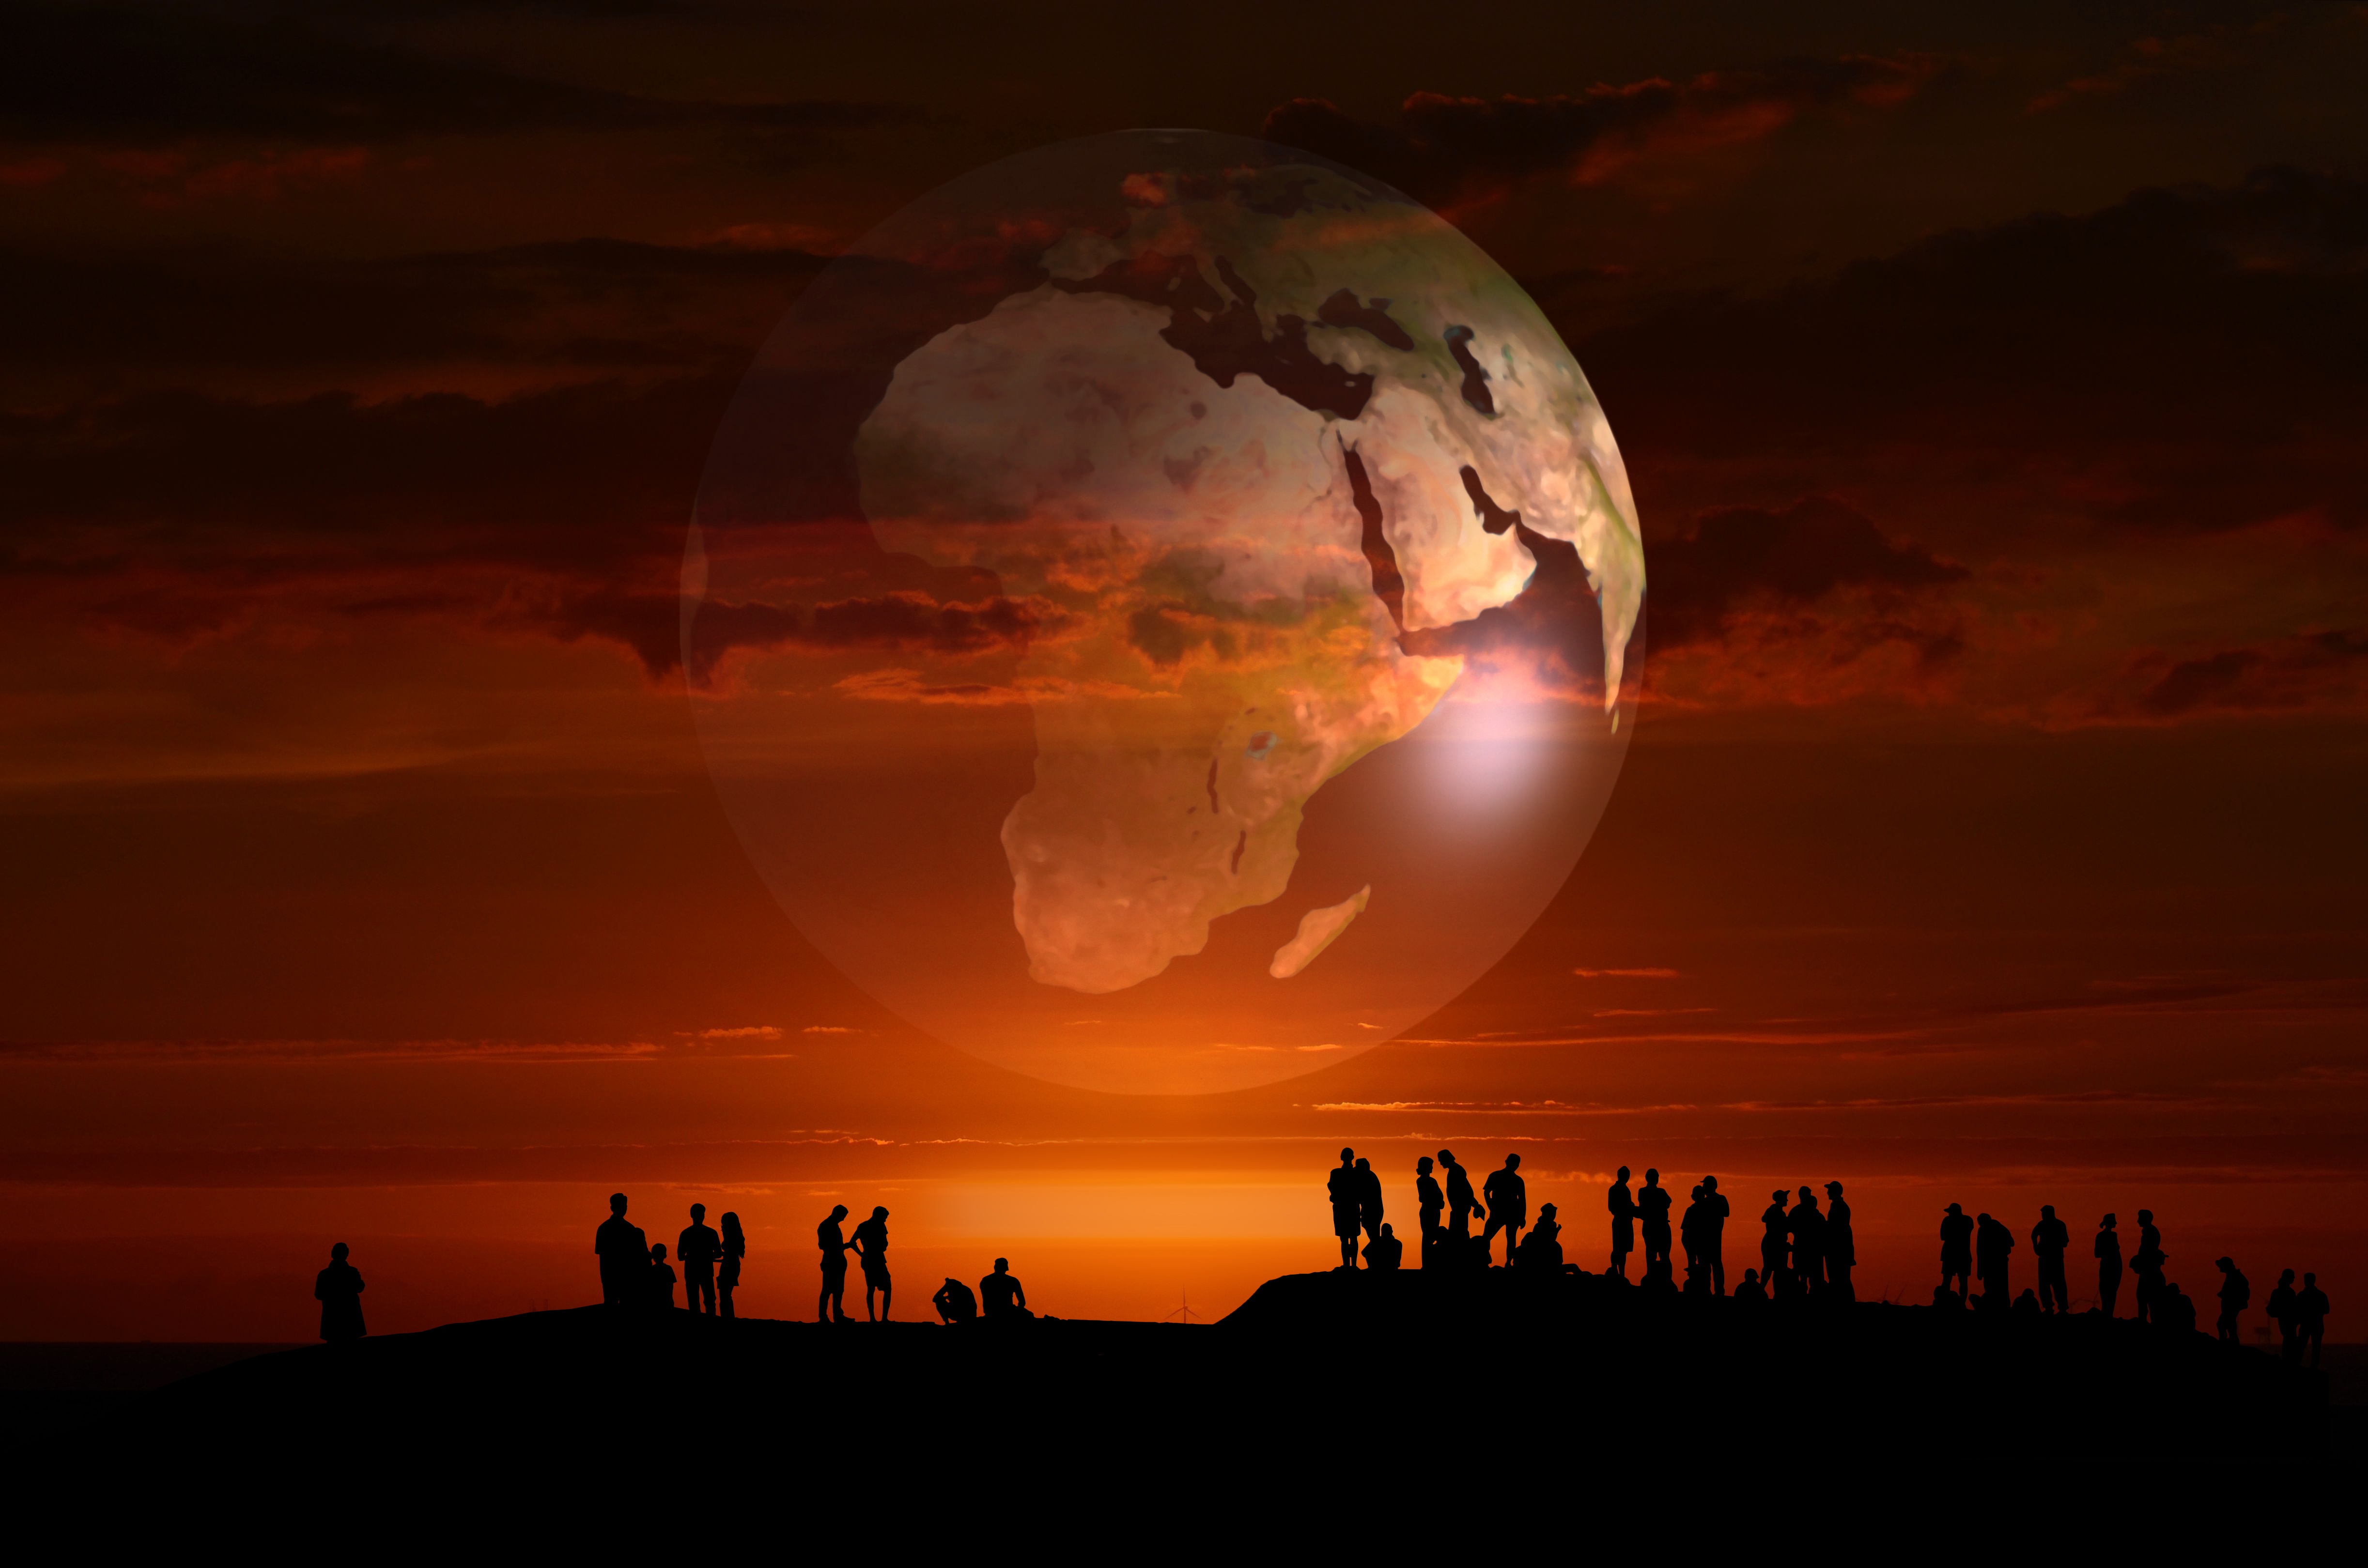 image of world matted on an orange sunrise silhouette of people of cliff at bottom of image